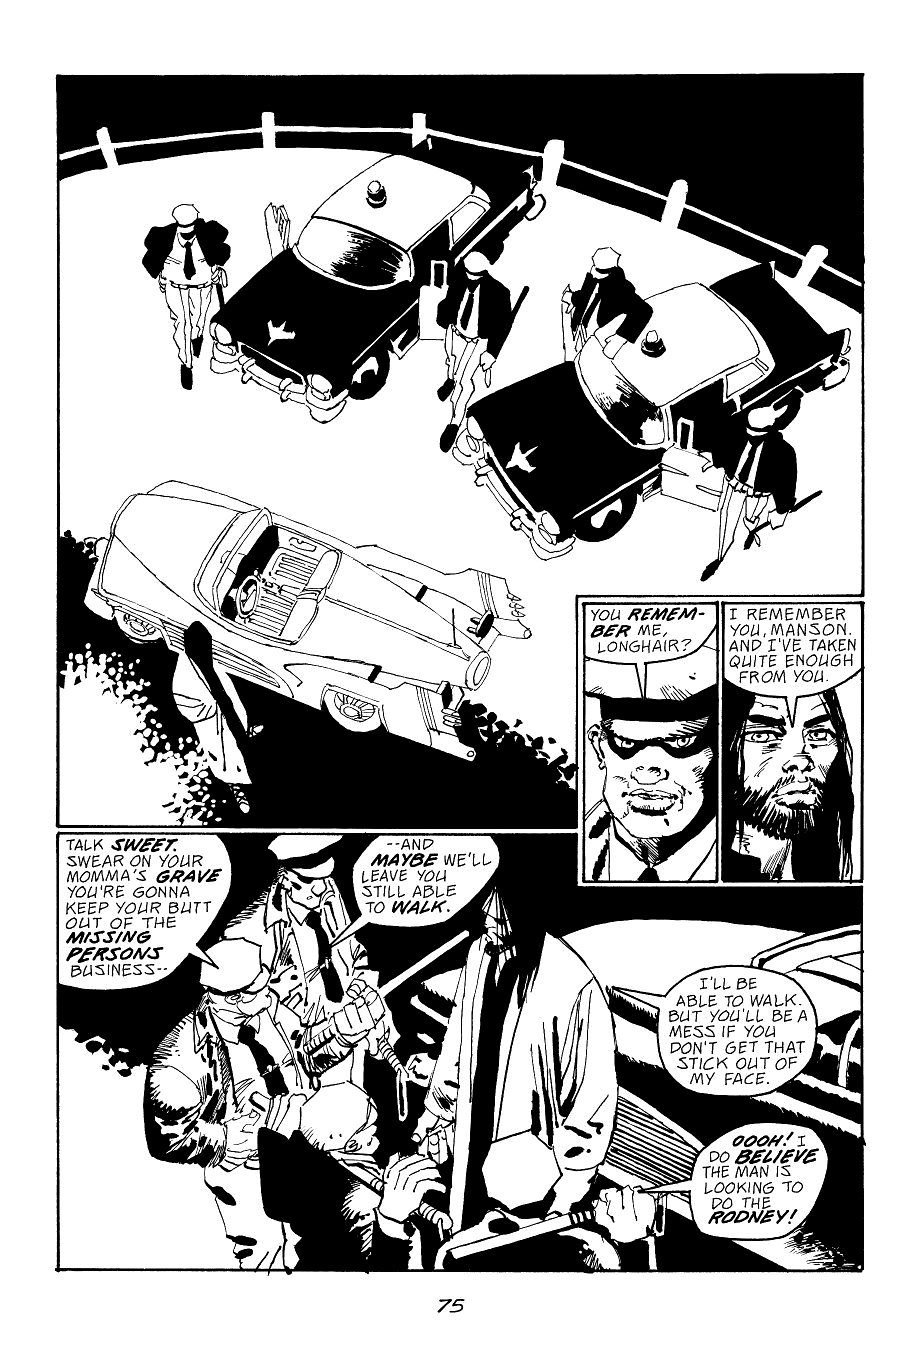 page 75 of sin city 7 hell and back